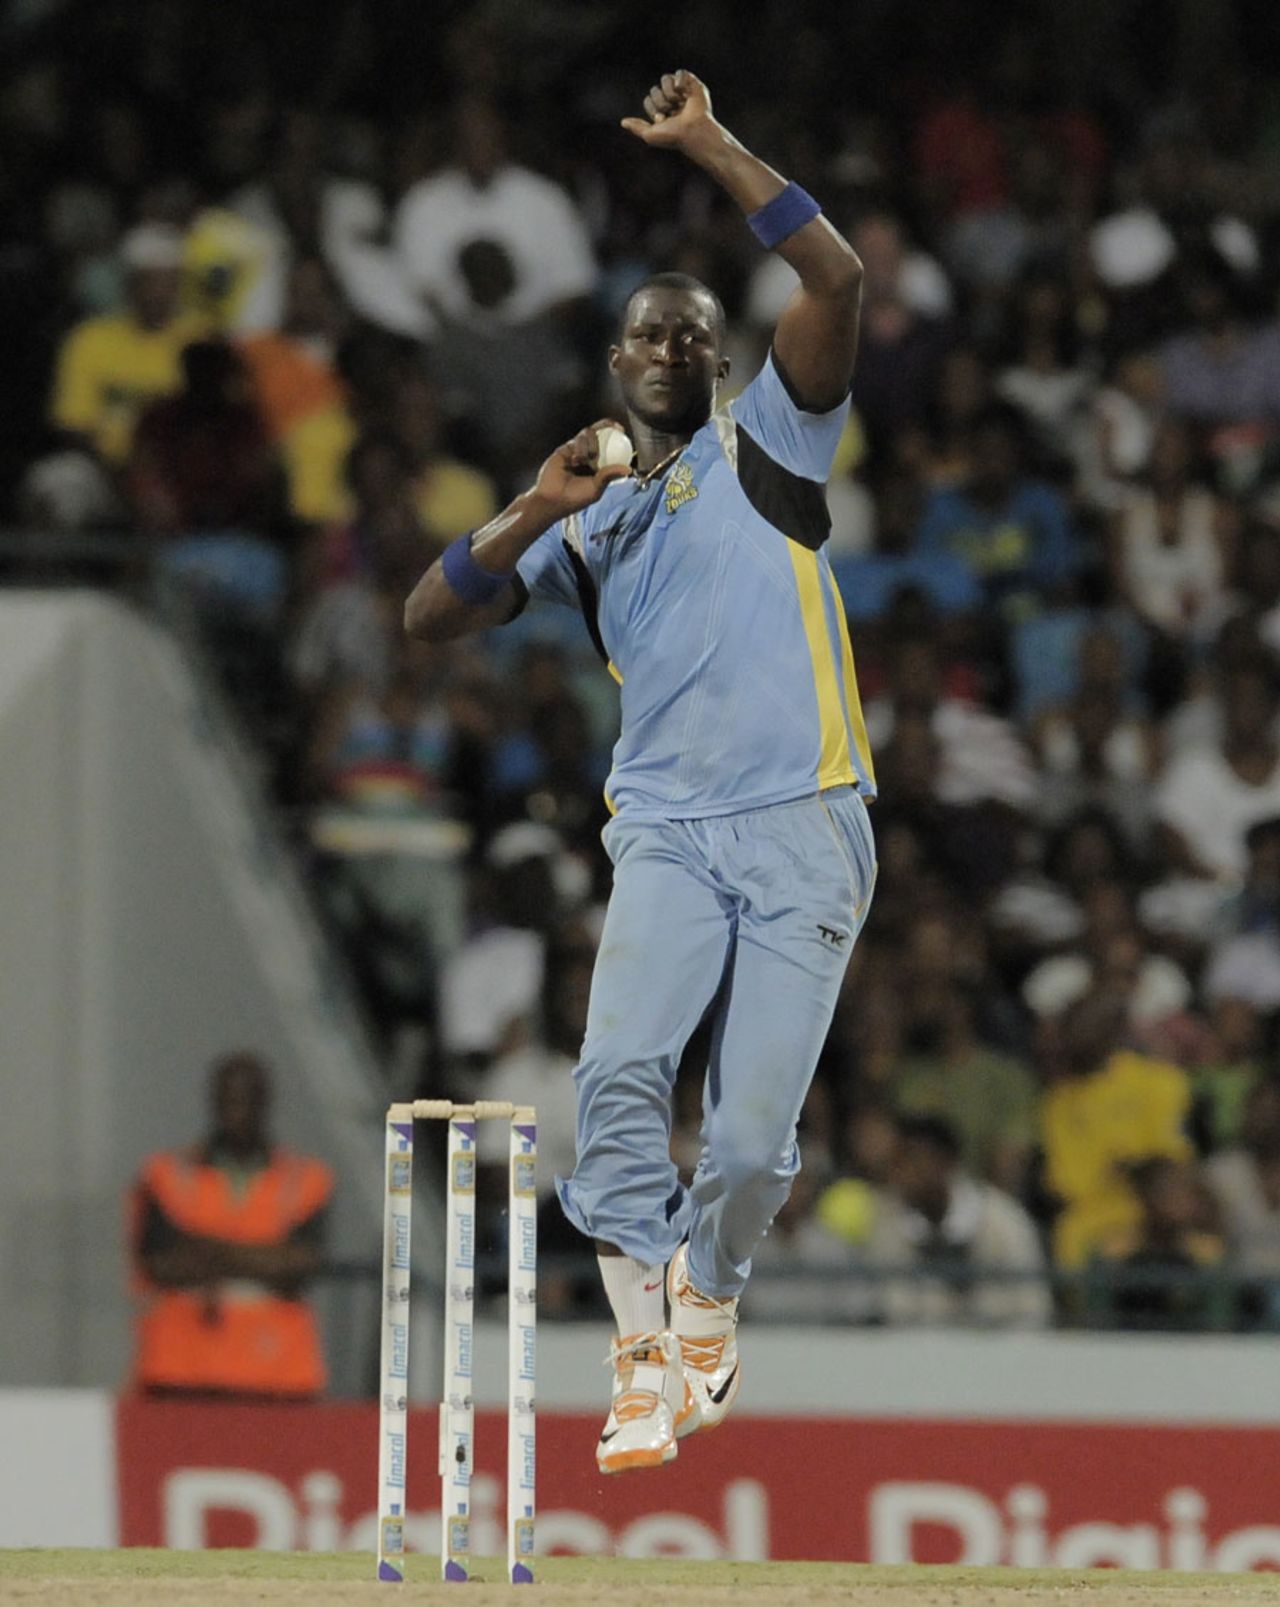 Darren Sammy picked up two wickets for 36 runs, Barbados Tridents v St Lucia Zouks, Caribbean Premier League 2013, Bridgetown, July 30, 2013